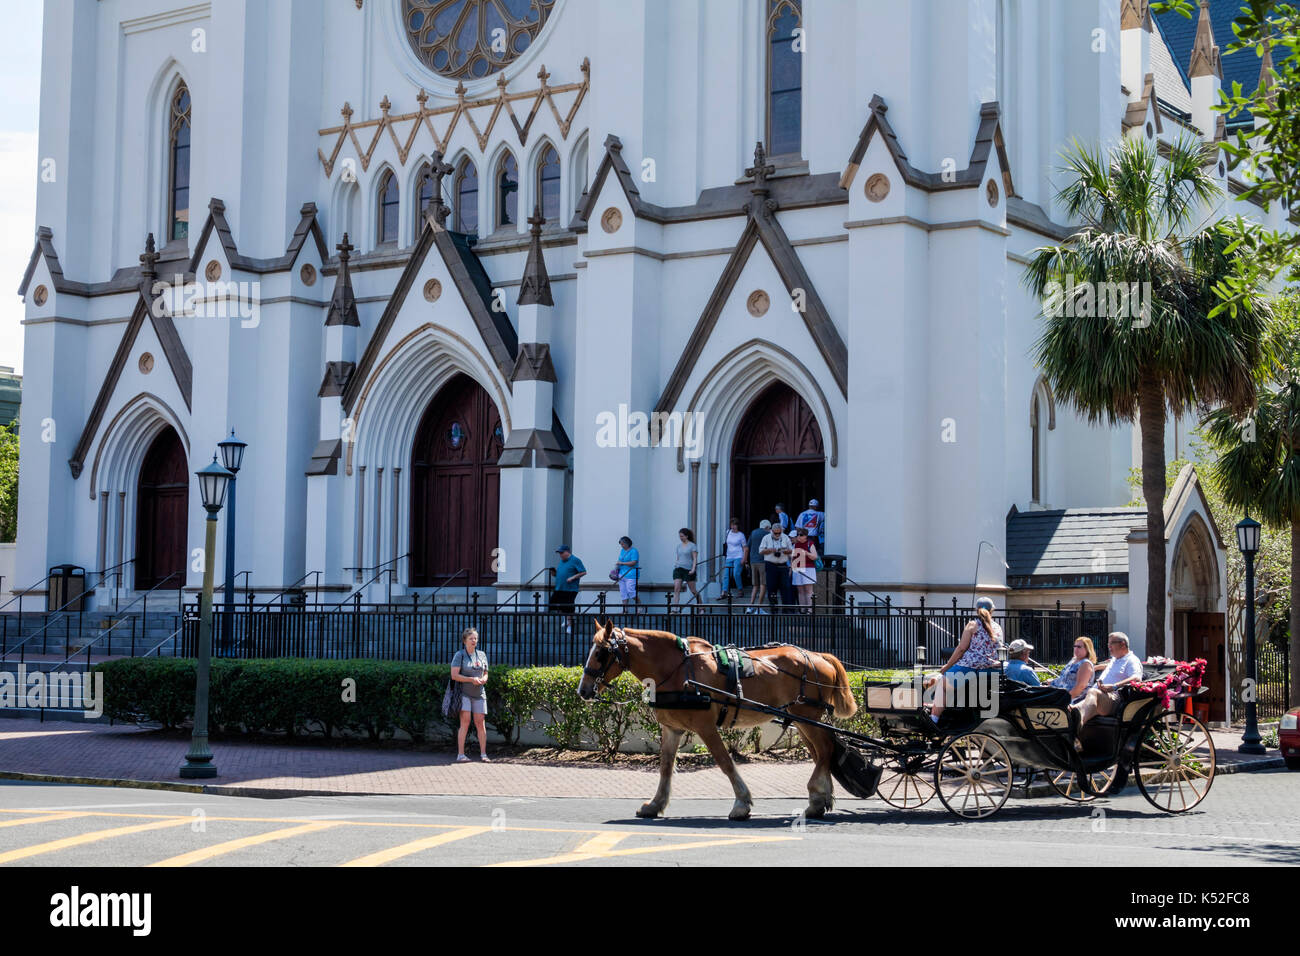 Savannah Georgia,historic district,Lafayette Square,Cathedral of St. John the Baptist,horse carriage,USA US United States America North American,GA170 Stock Photo